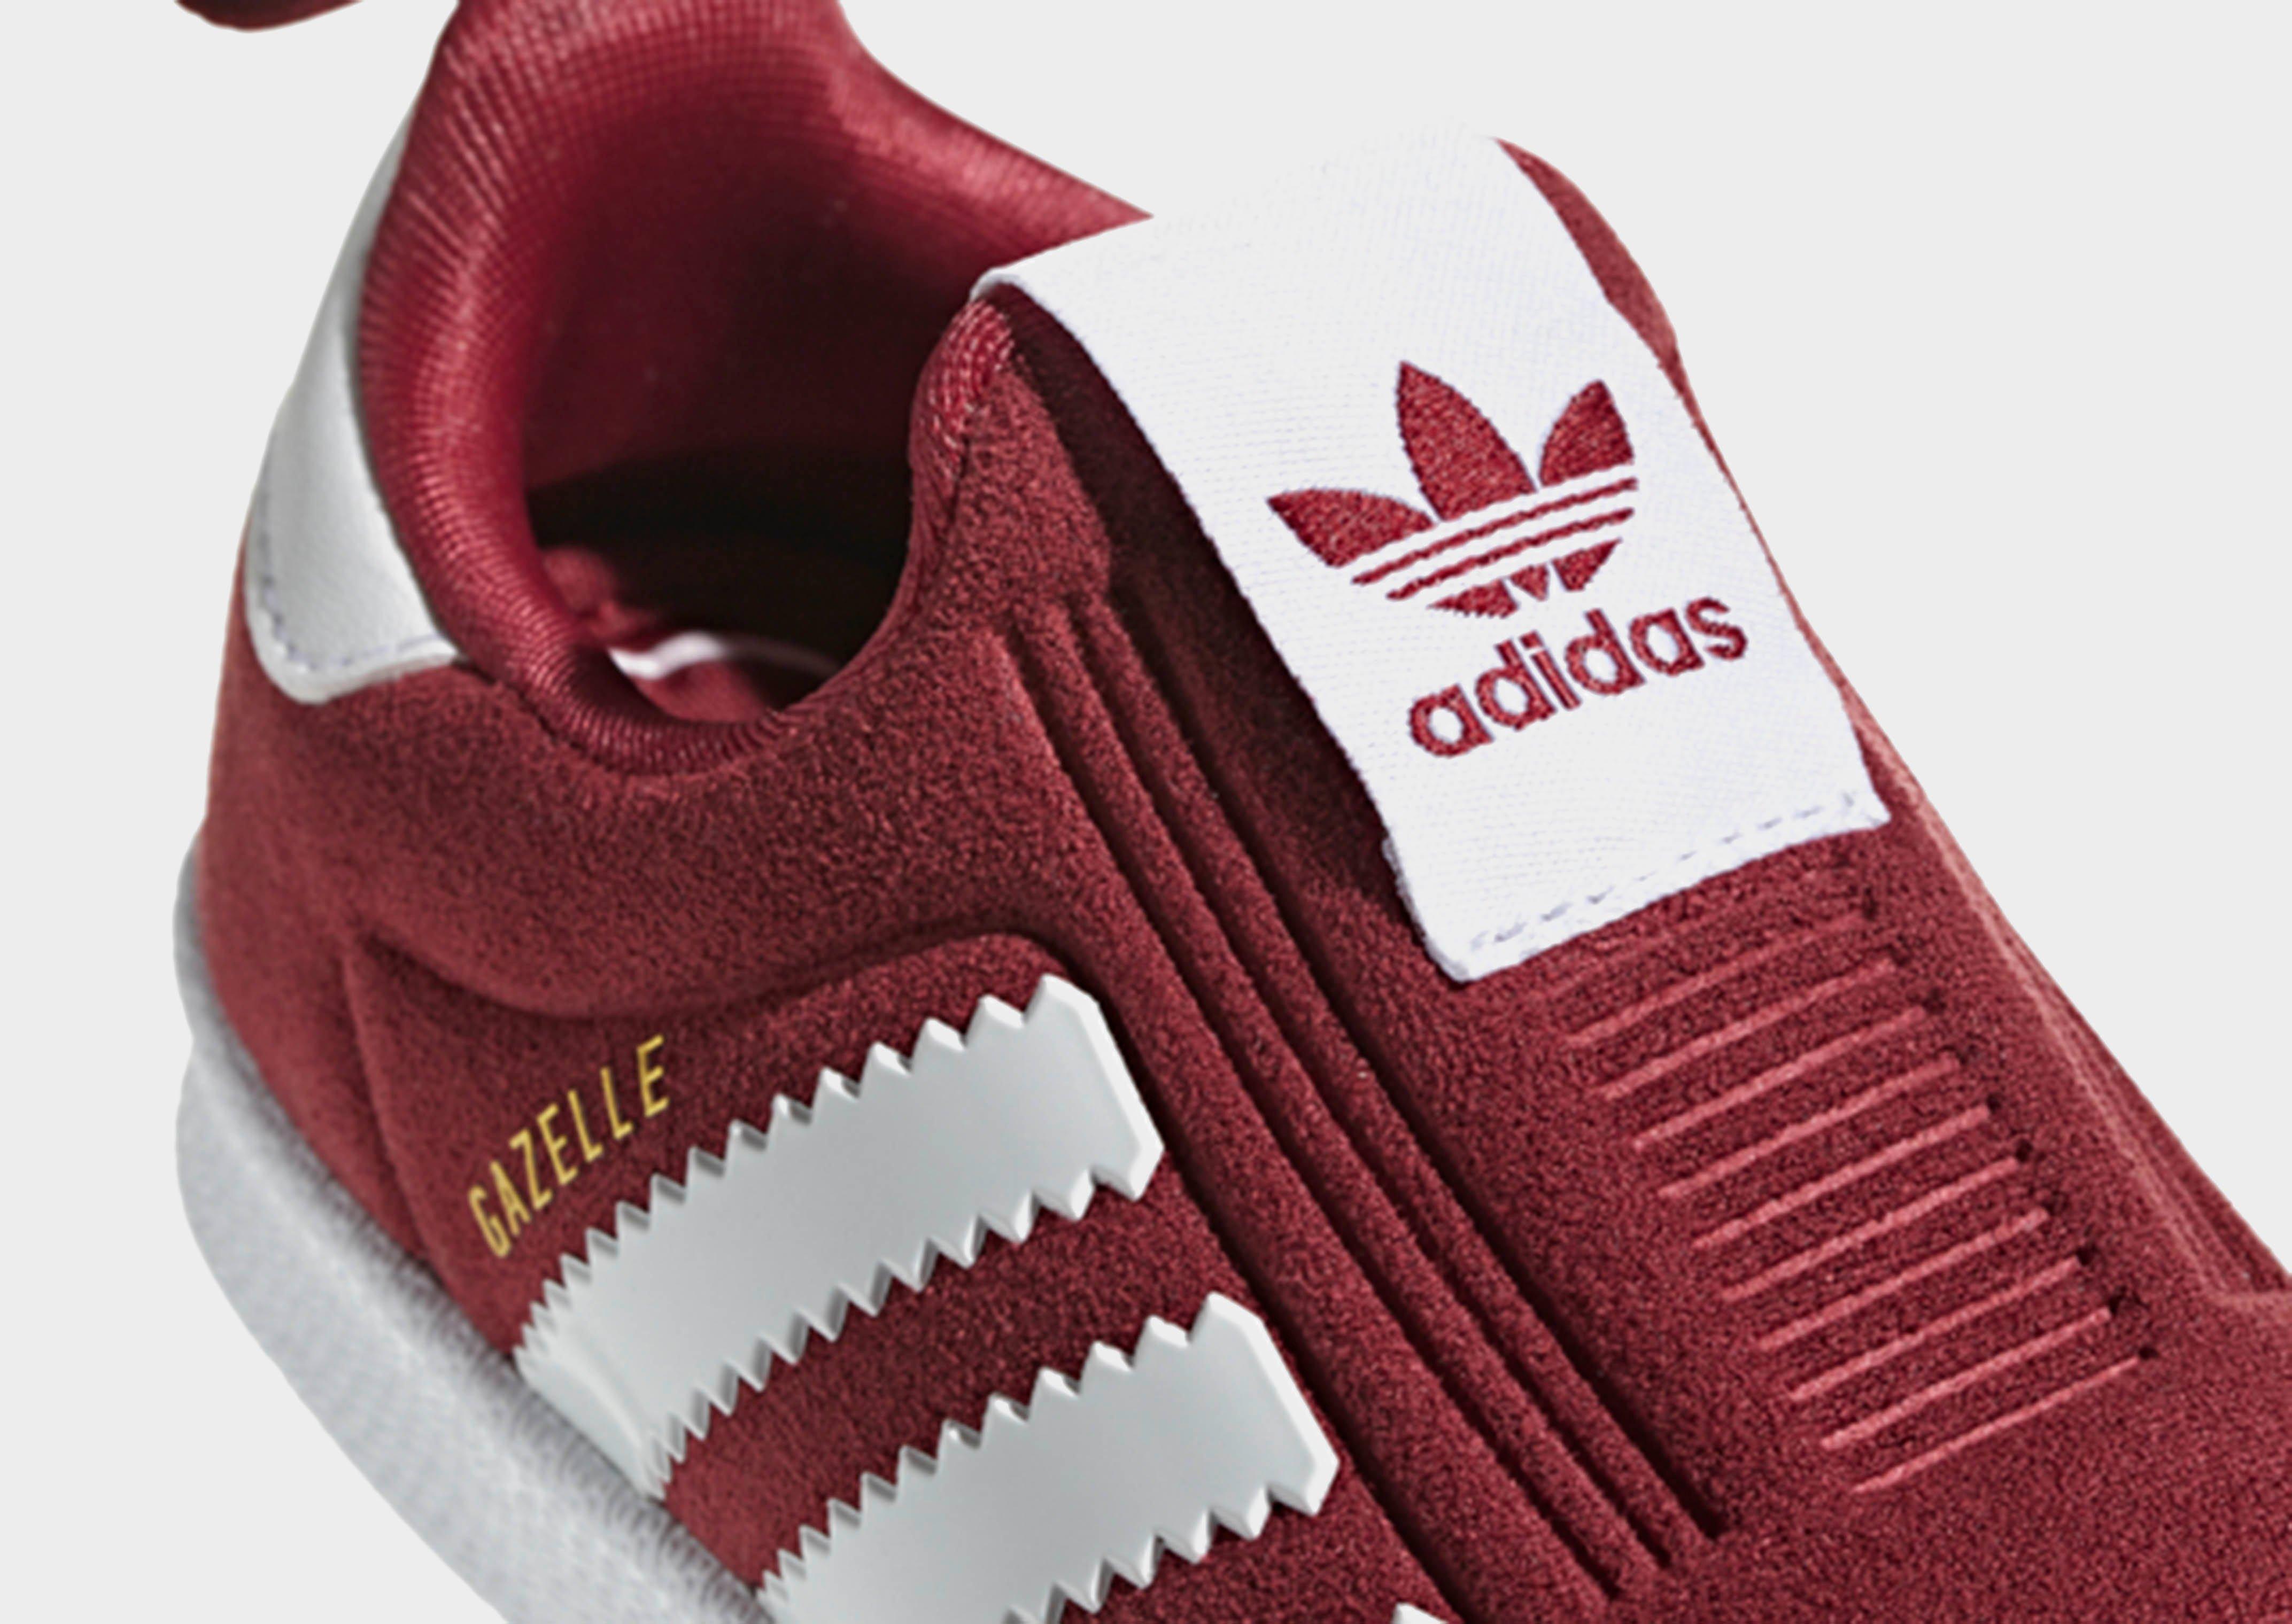 adidas Suede Gazelle 360 Shoes in Red 